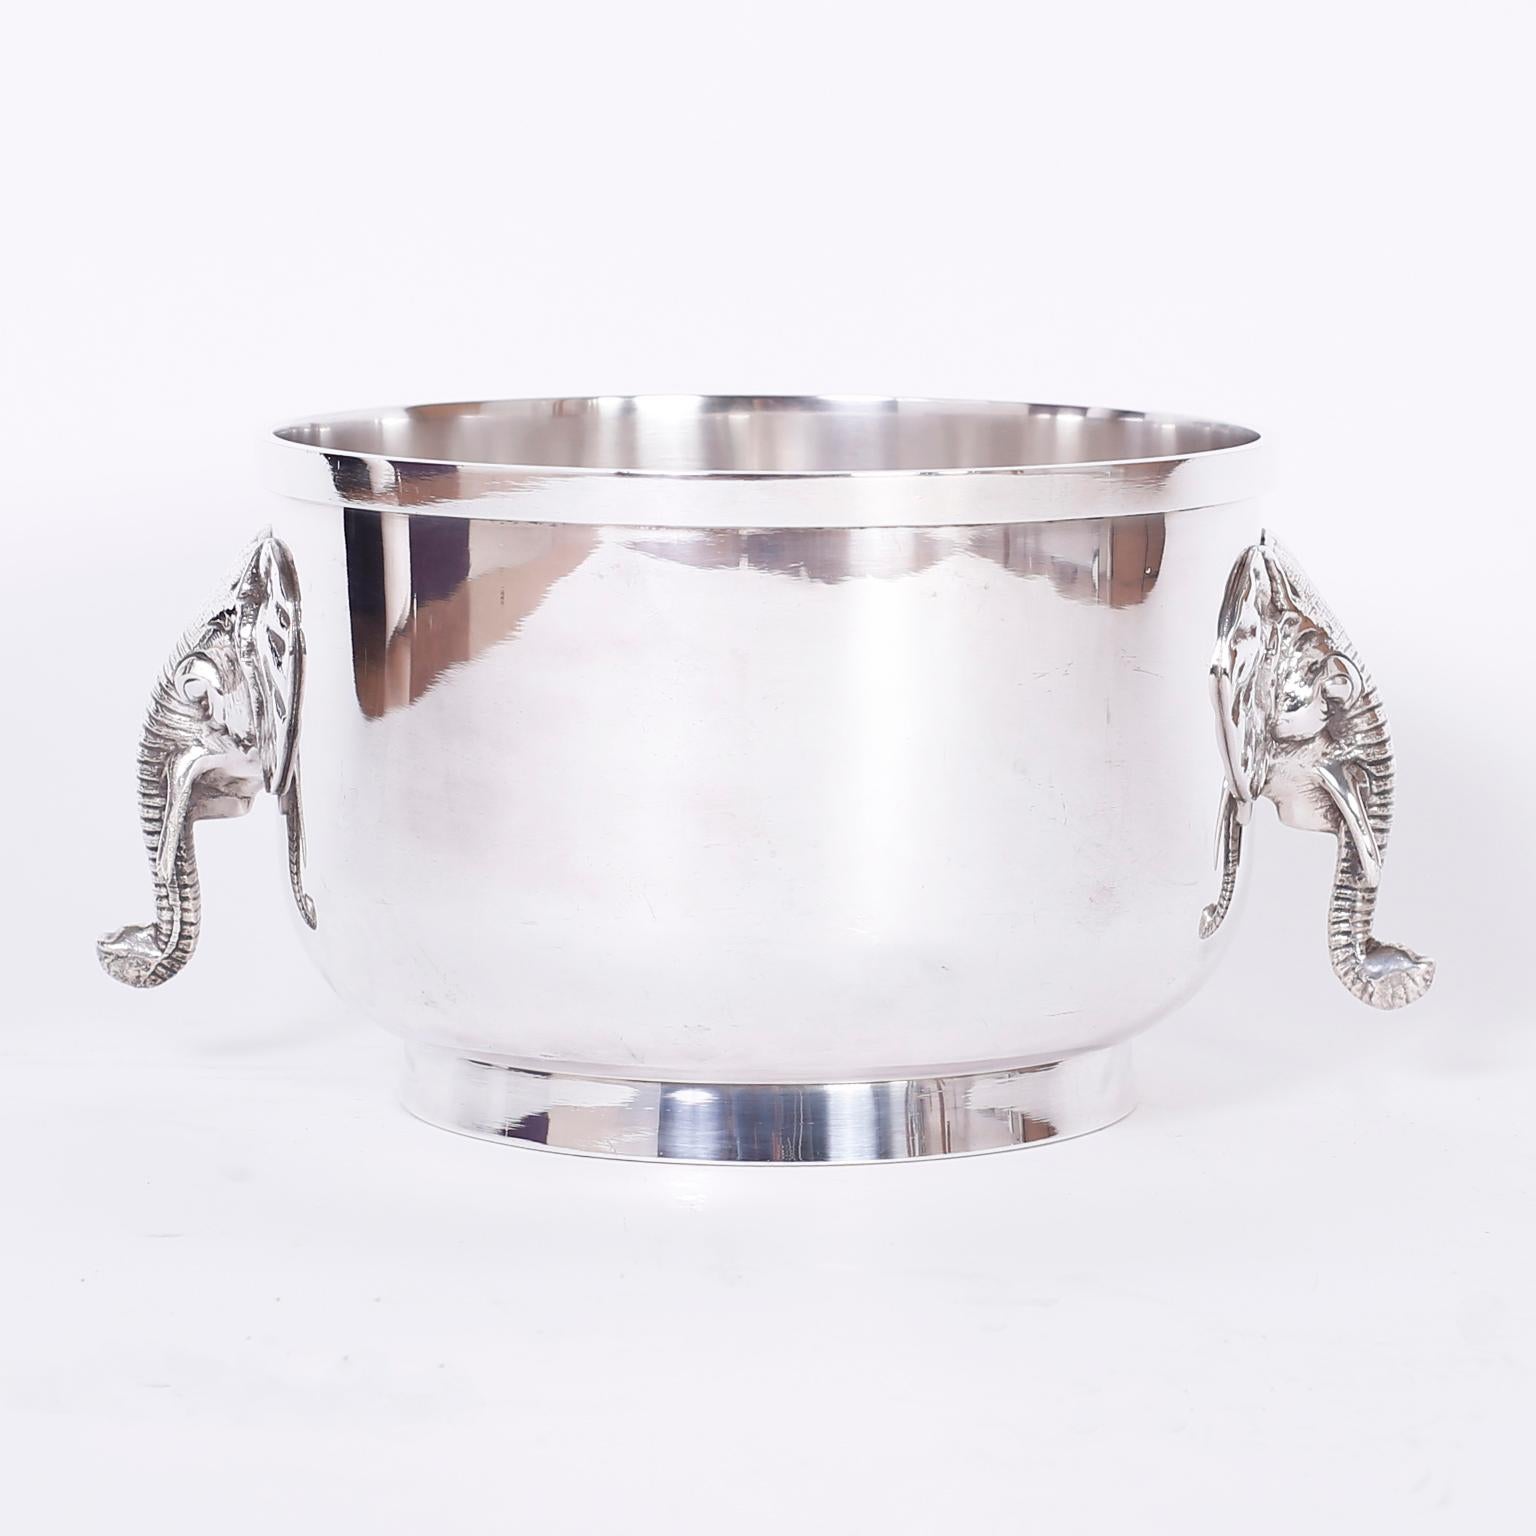 Anglo Indian silver plate on brass jardinière or planter with elephant head handles, perfect for orchid arrangements.